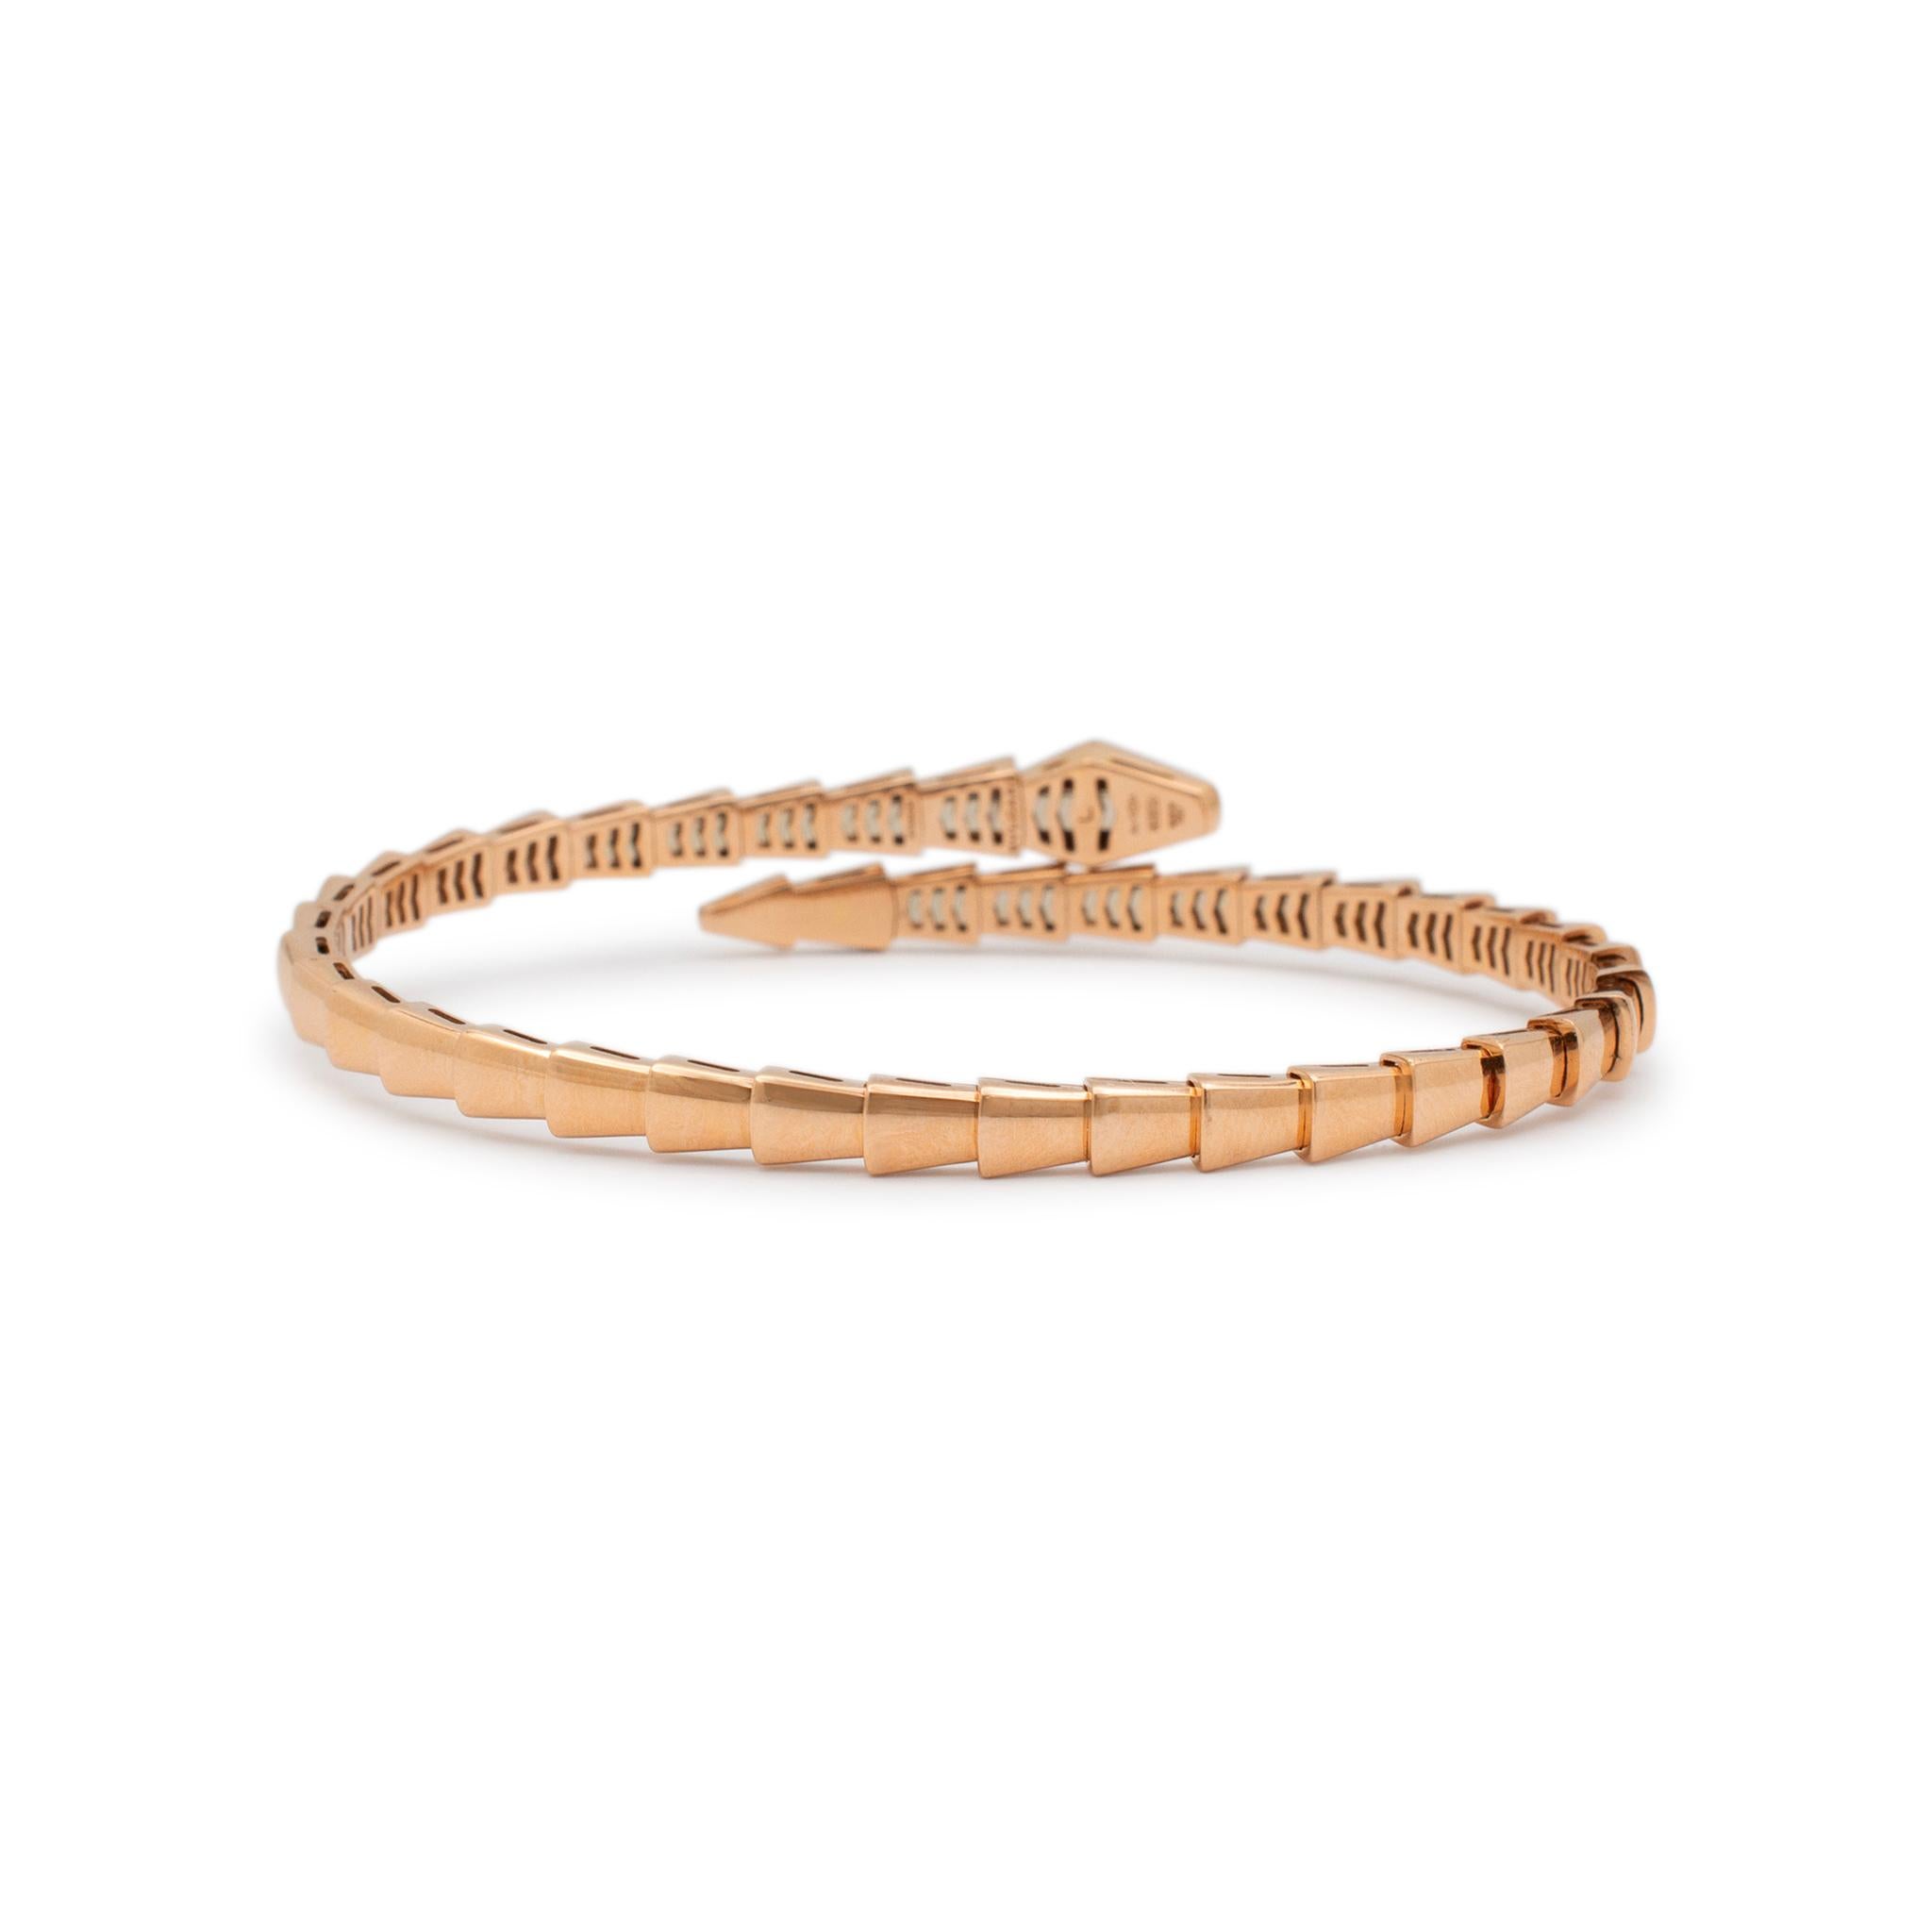 Bvlgari 18K Rose Gold Serpenti Viper Flexible Bangle Bracelet In Excellent Condition For Sale In Houston, TX